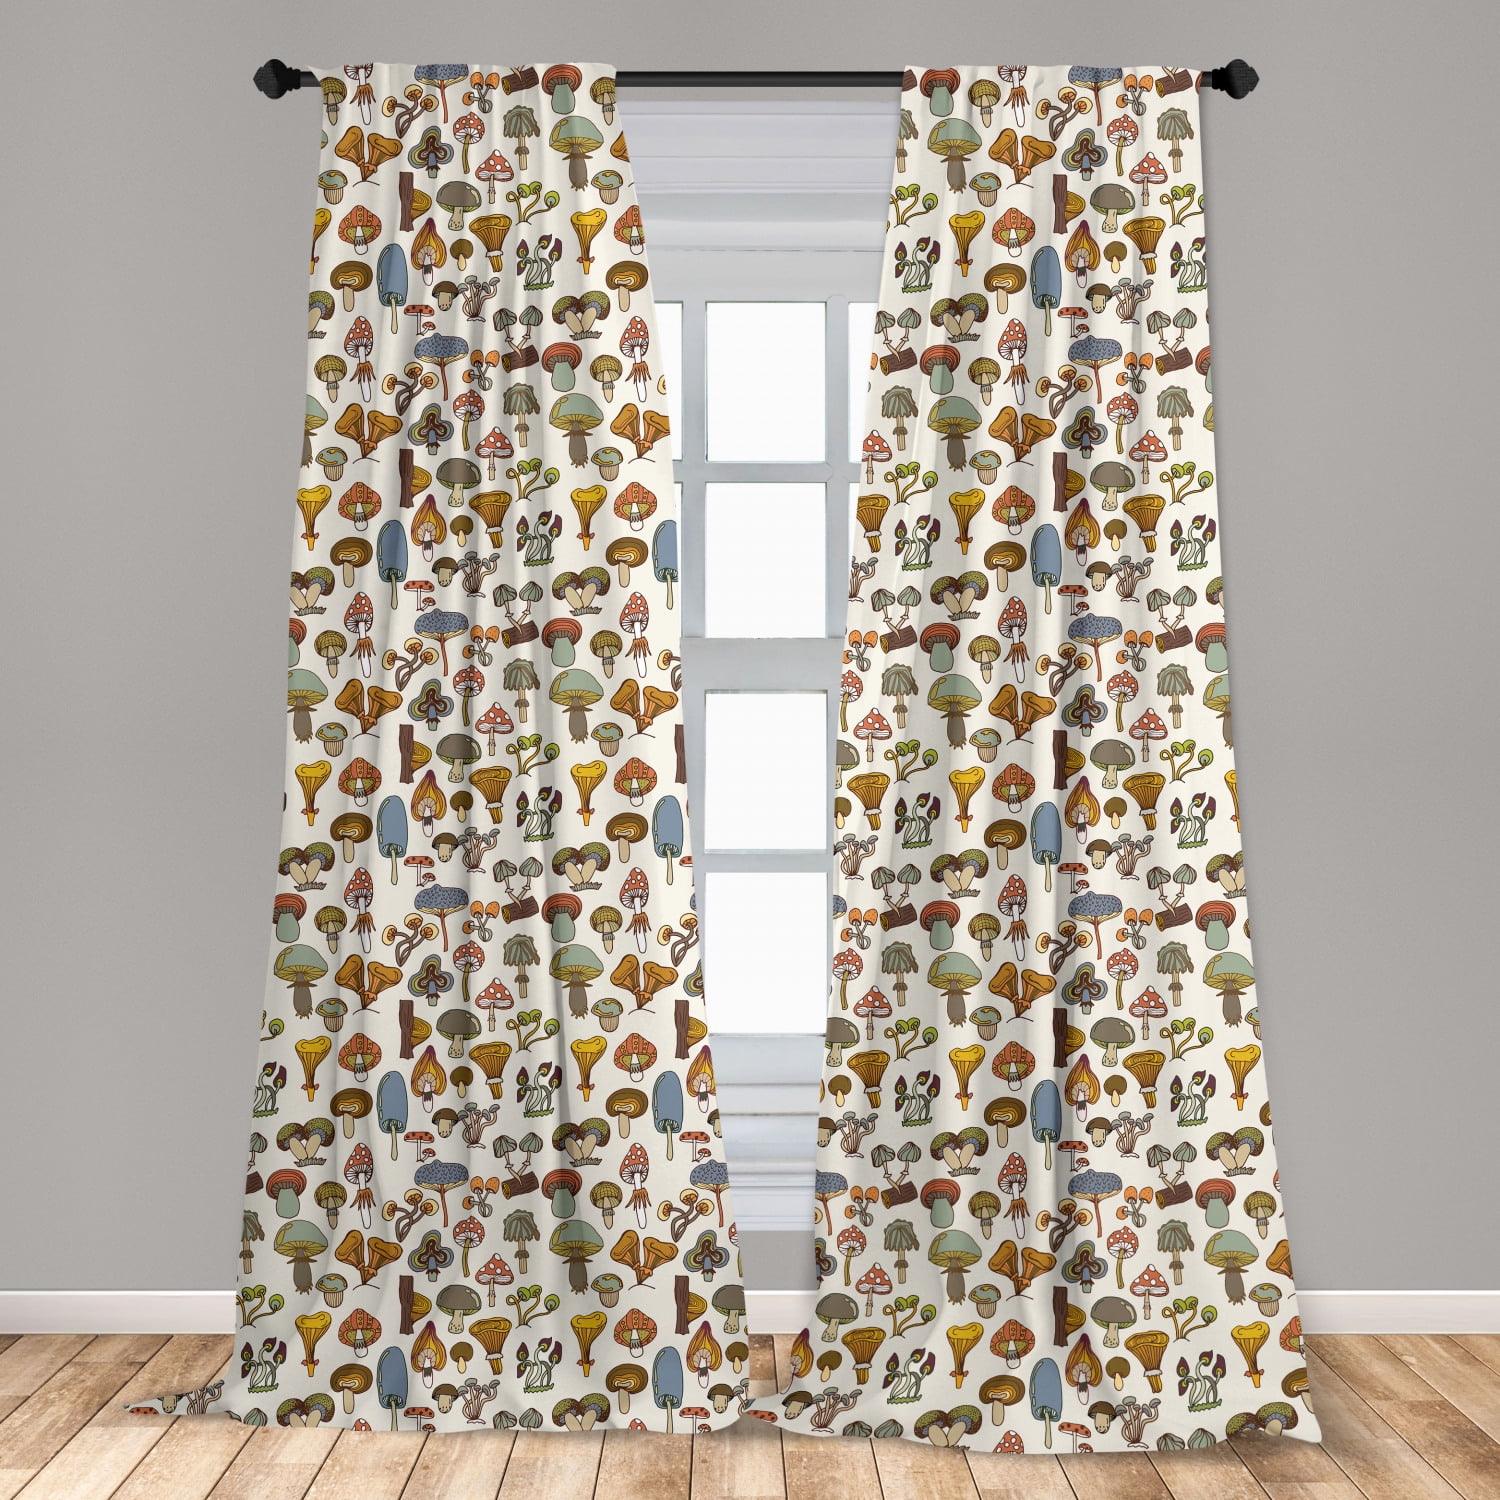 Colored Psychedelic Mushrooms Shower Curtain Funny Butt For Bathroom Bathtub 